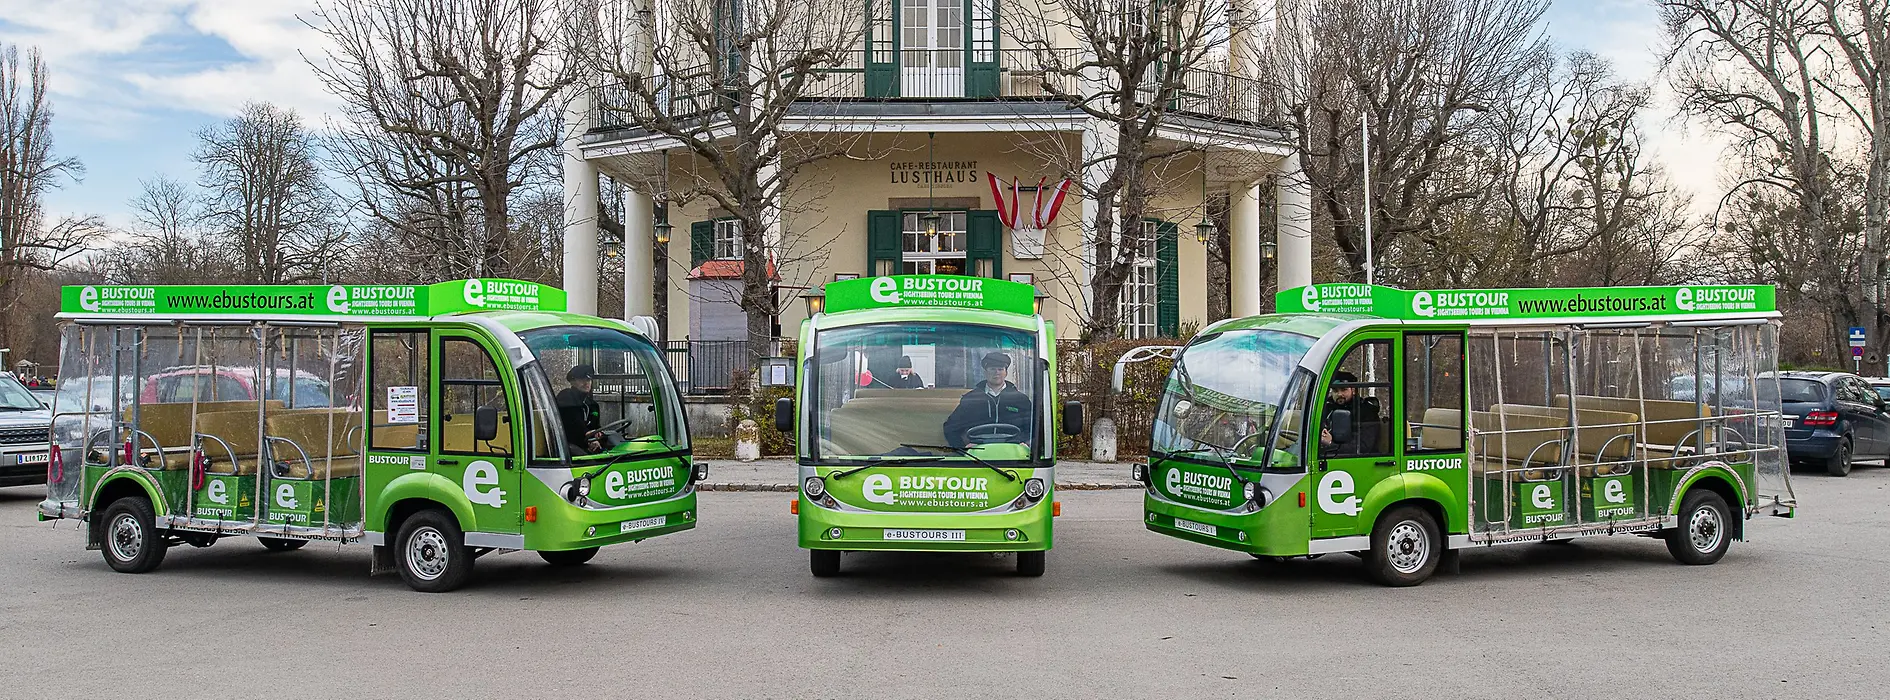 Three busses in front of Viennese Lusthaus